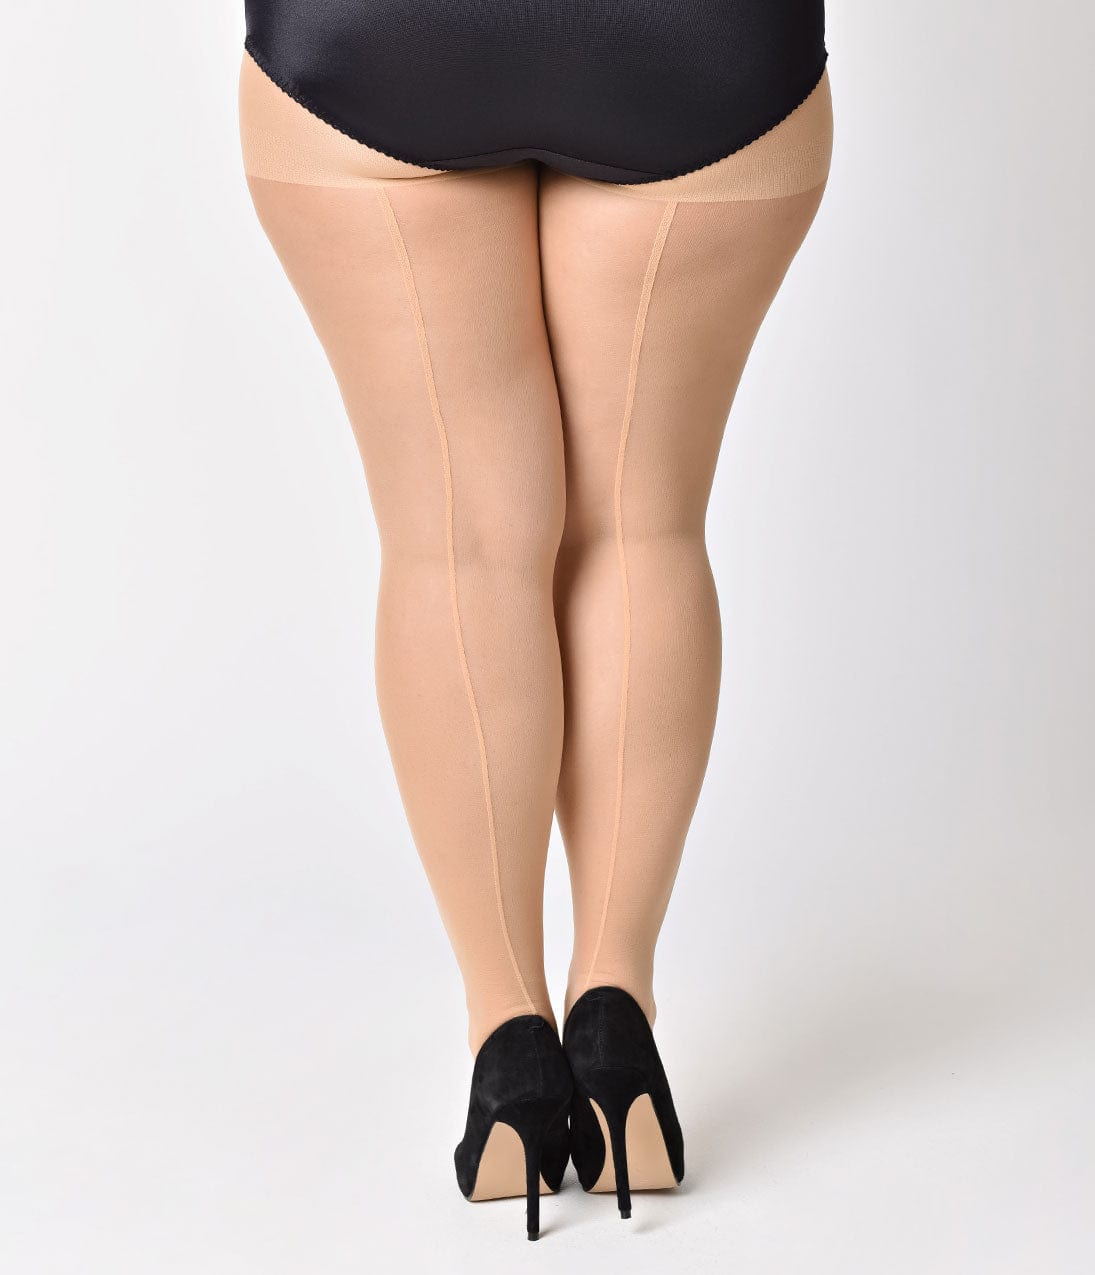 Plus Opaque Velvet Pantyhose Tights 8 Colors - HER Plus Size by Ench